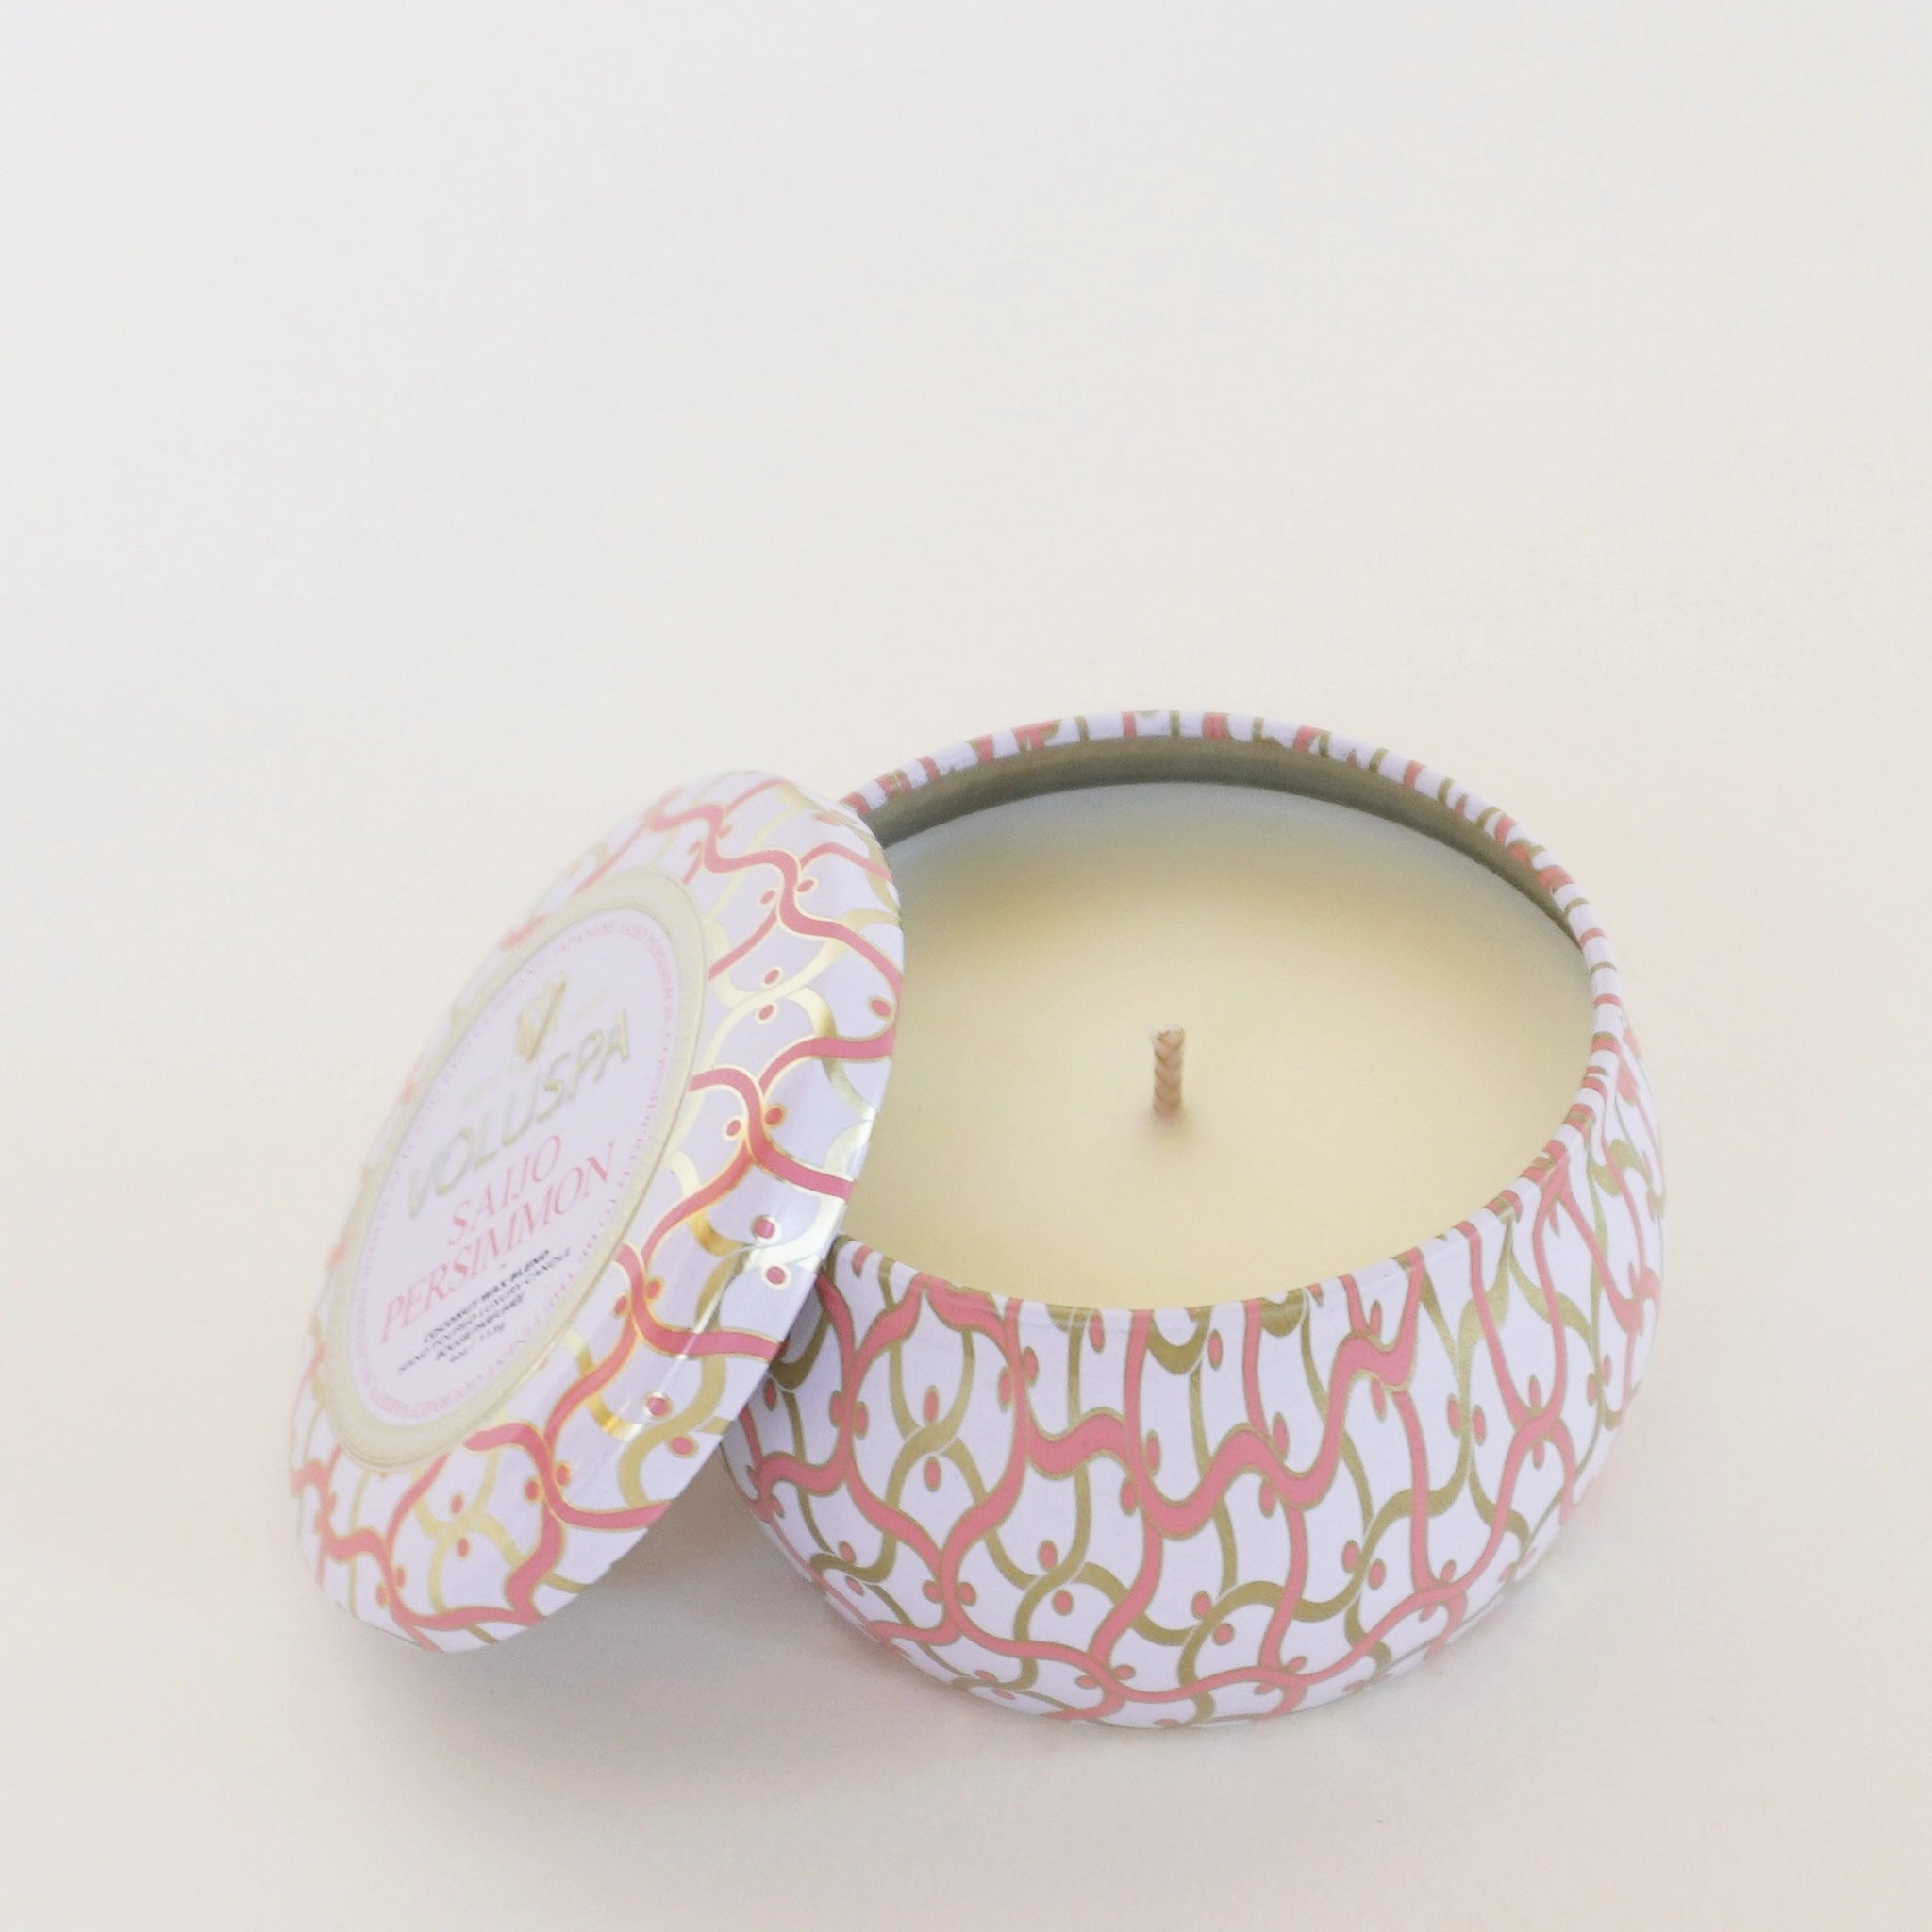 In front of a white background is a round tin candle. The tin is white with pink and gold swirly lines. Inside the tin is a white candle with a white wick in the center. There is a matching lid leaning against the left side of the candle.